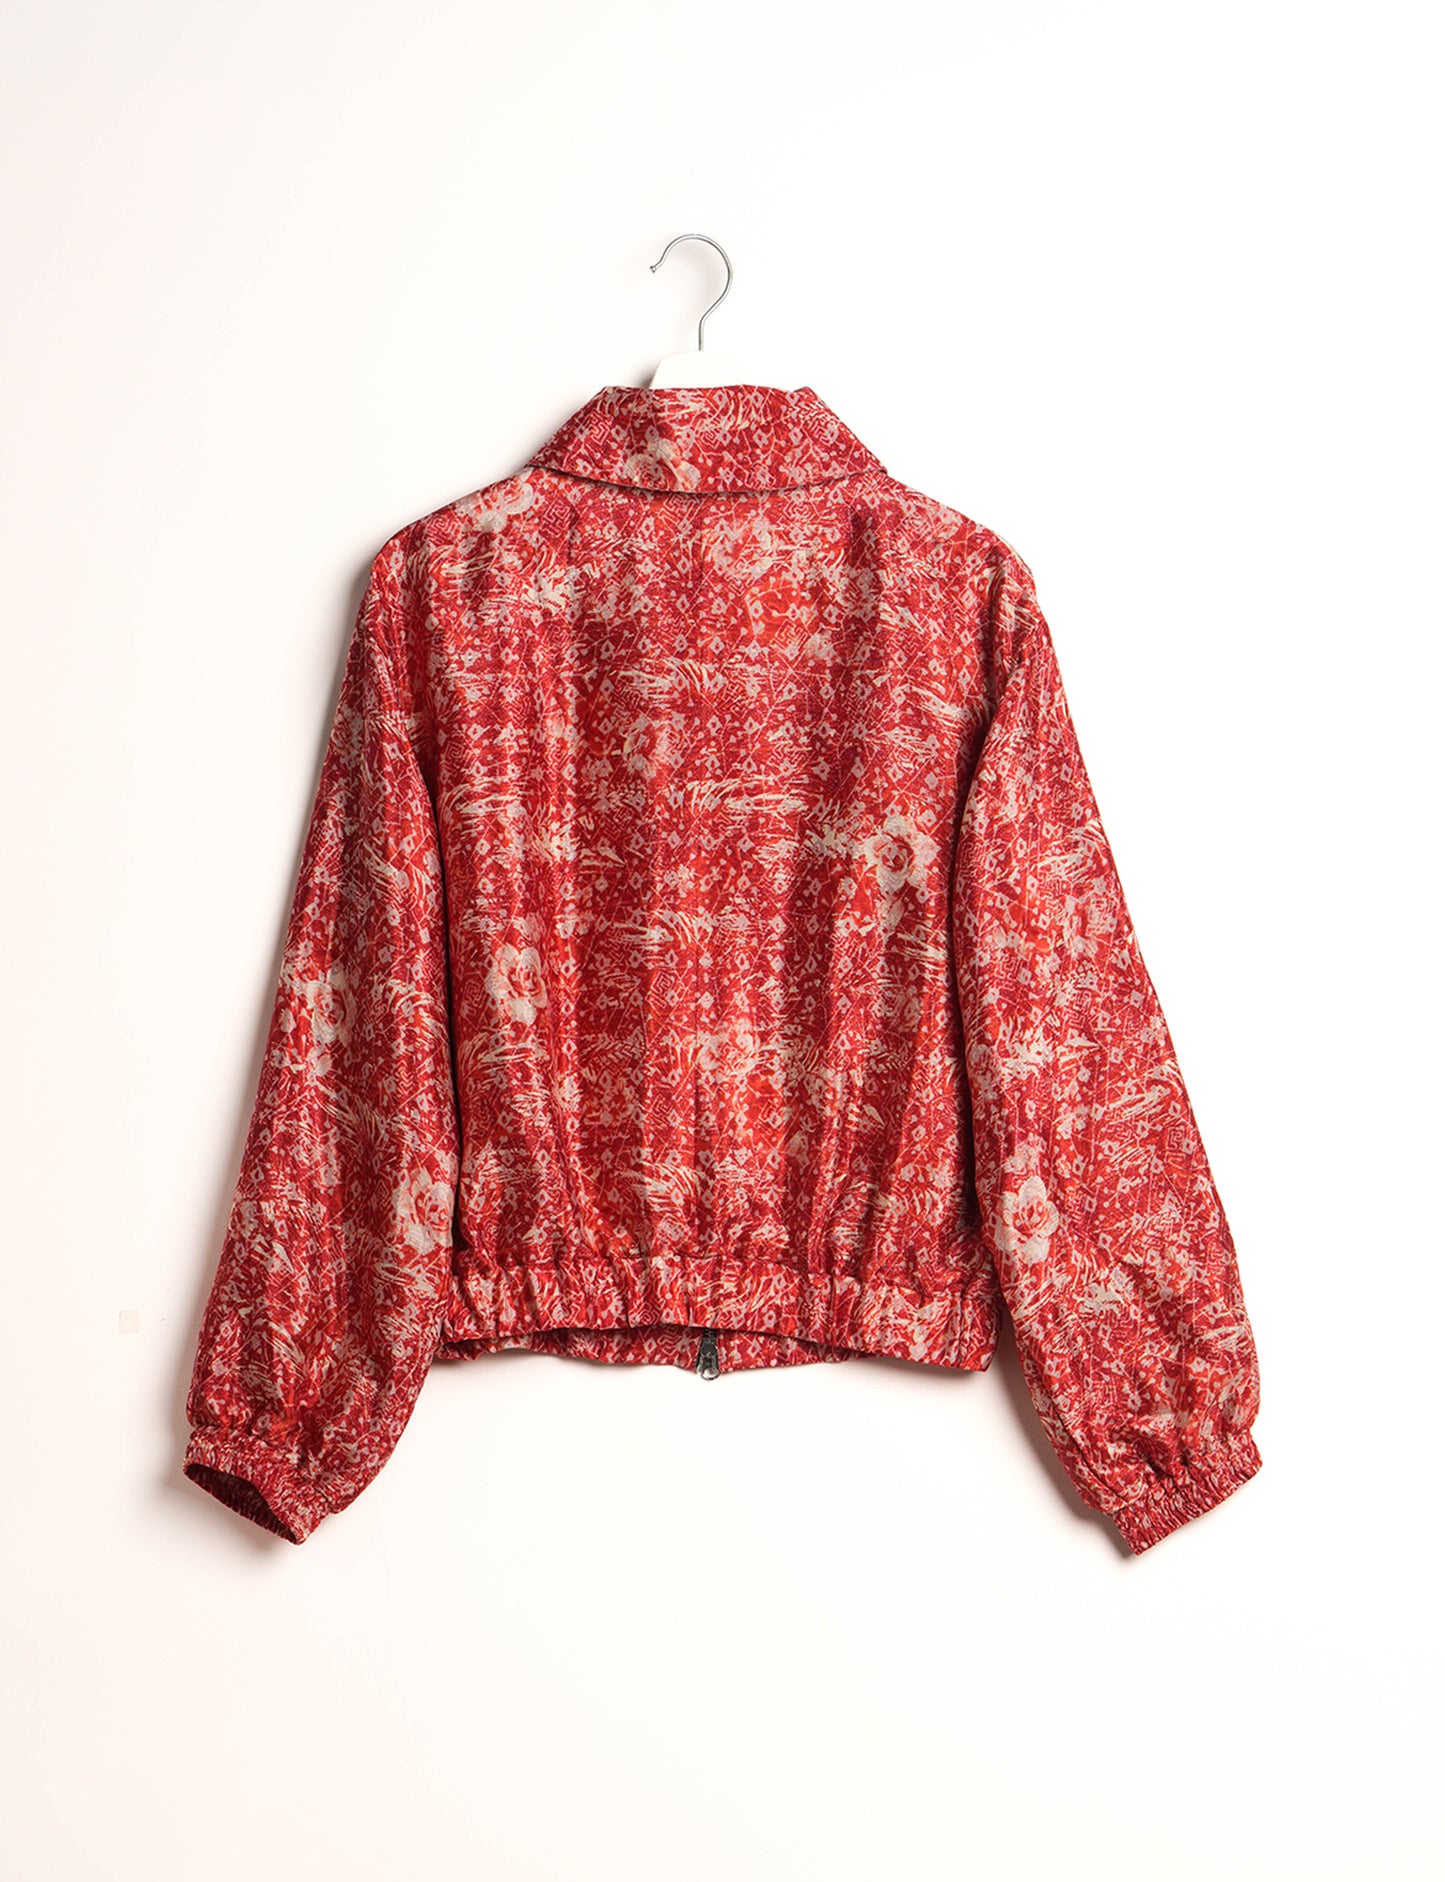 Stylish BOMBER JACKET, an upcycled clothing masterpiece with a cute cropped shape, elasticated details, and detachable metallic zipper. Contrast sari print lining adds a unique touch. Explore sustainable and eco-friendly fashion.